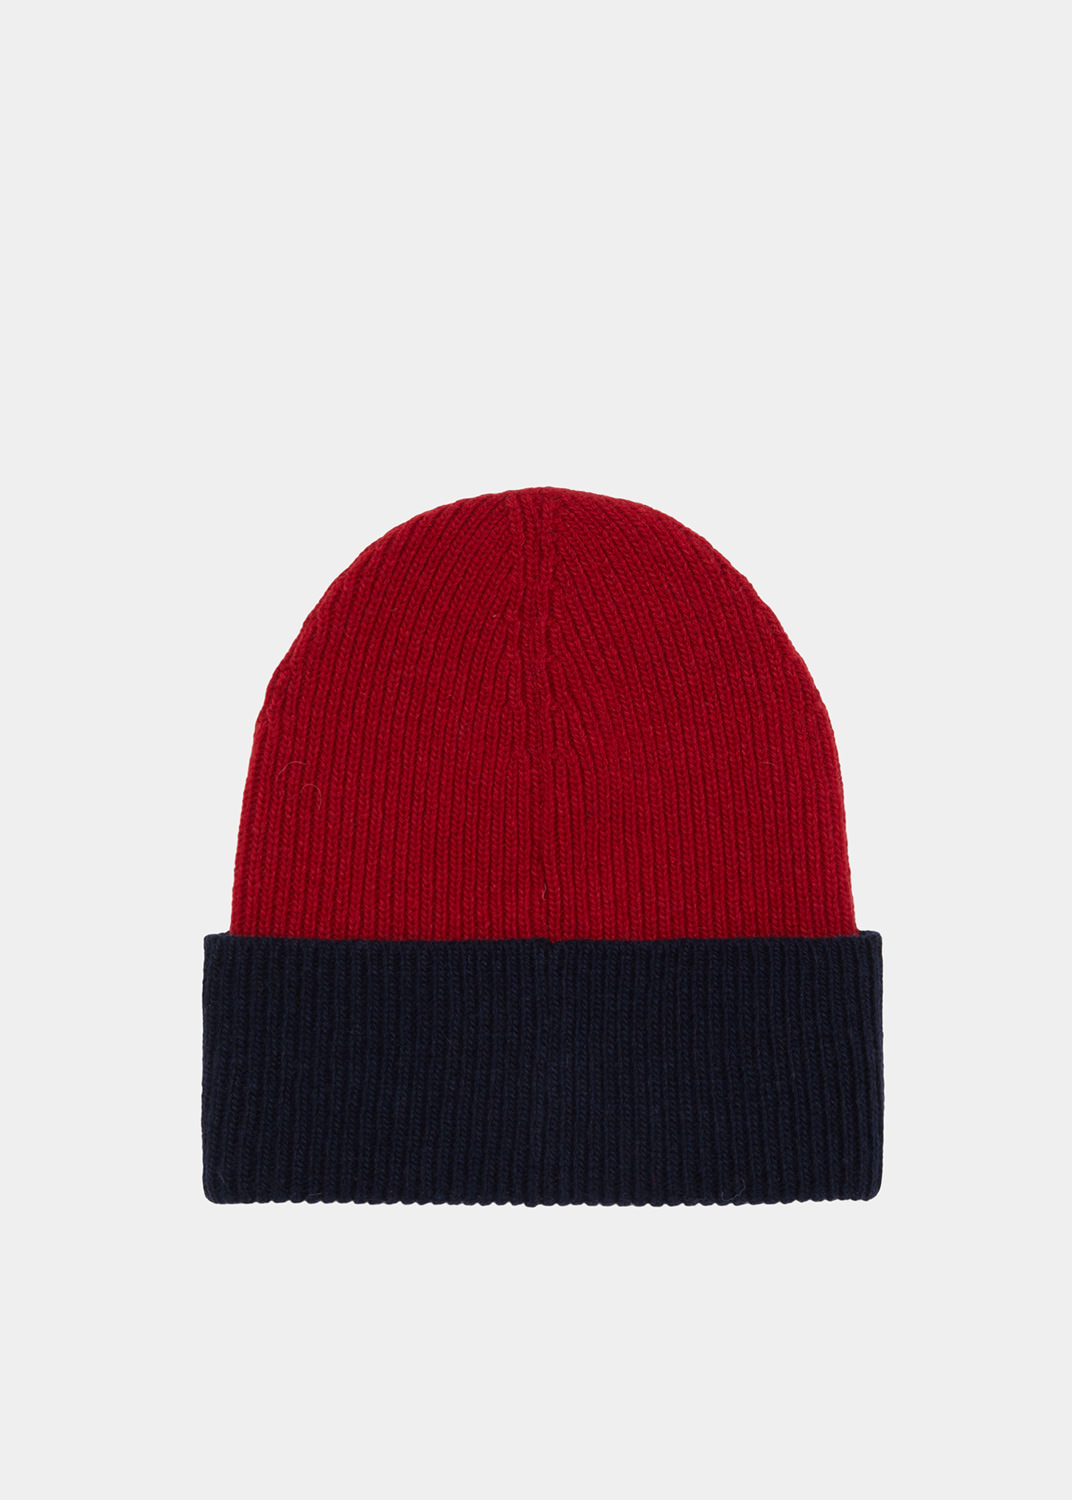 D.A.T.E.: BETTO WOOL RED-BLUE